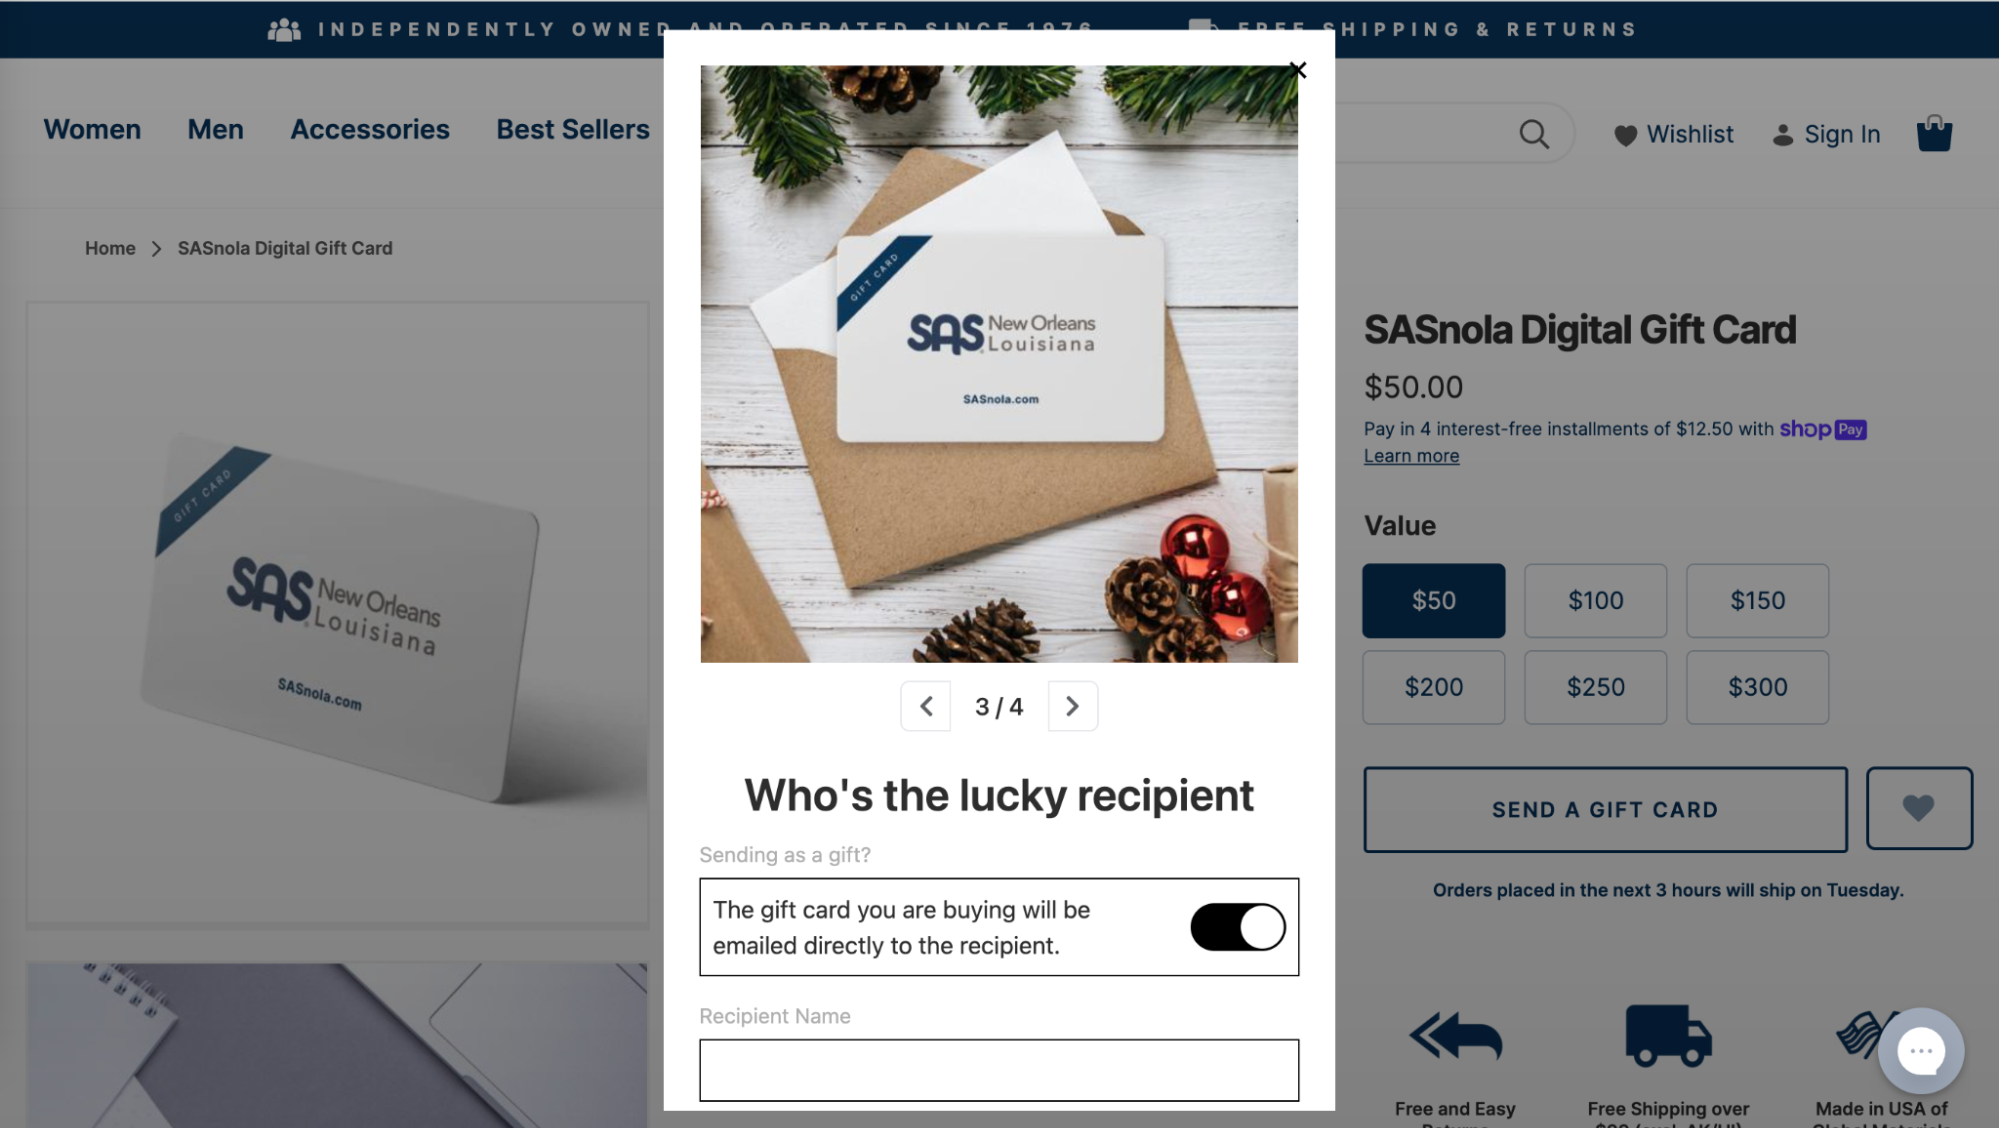 SASnola offers customers the ability to send digital gift cards directly to the recipient